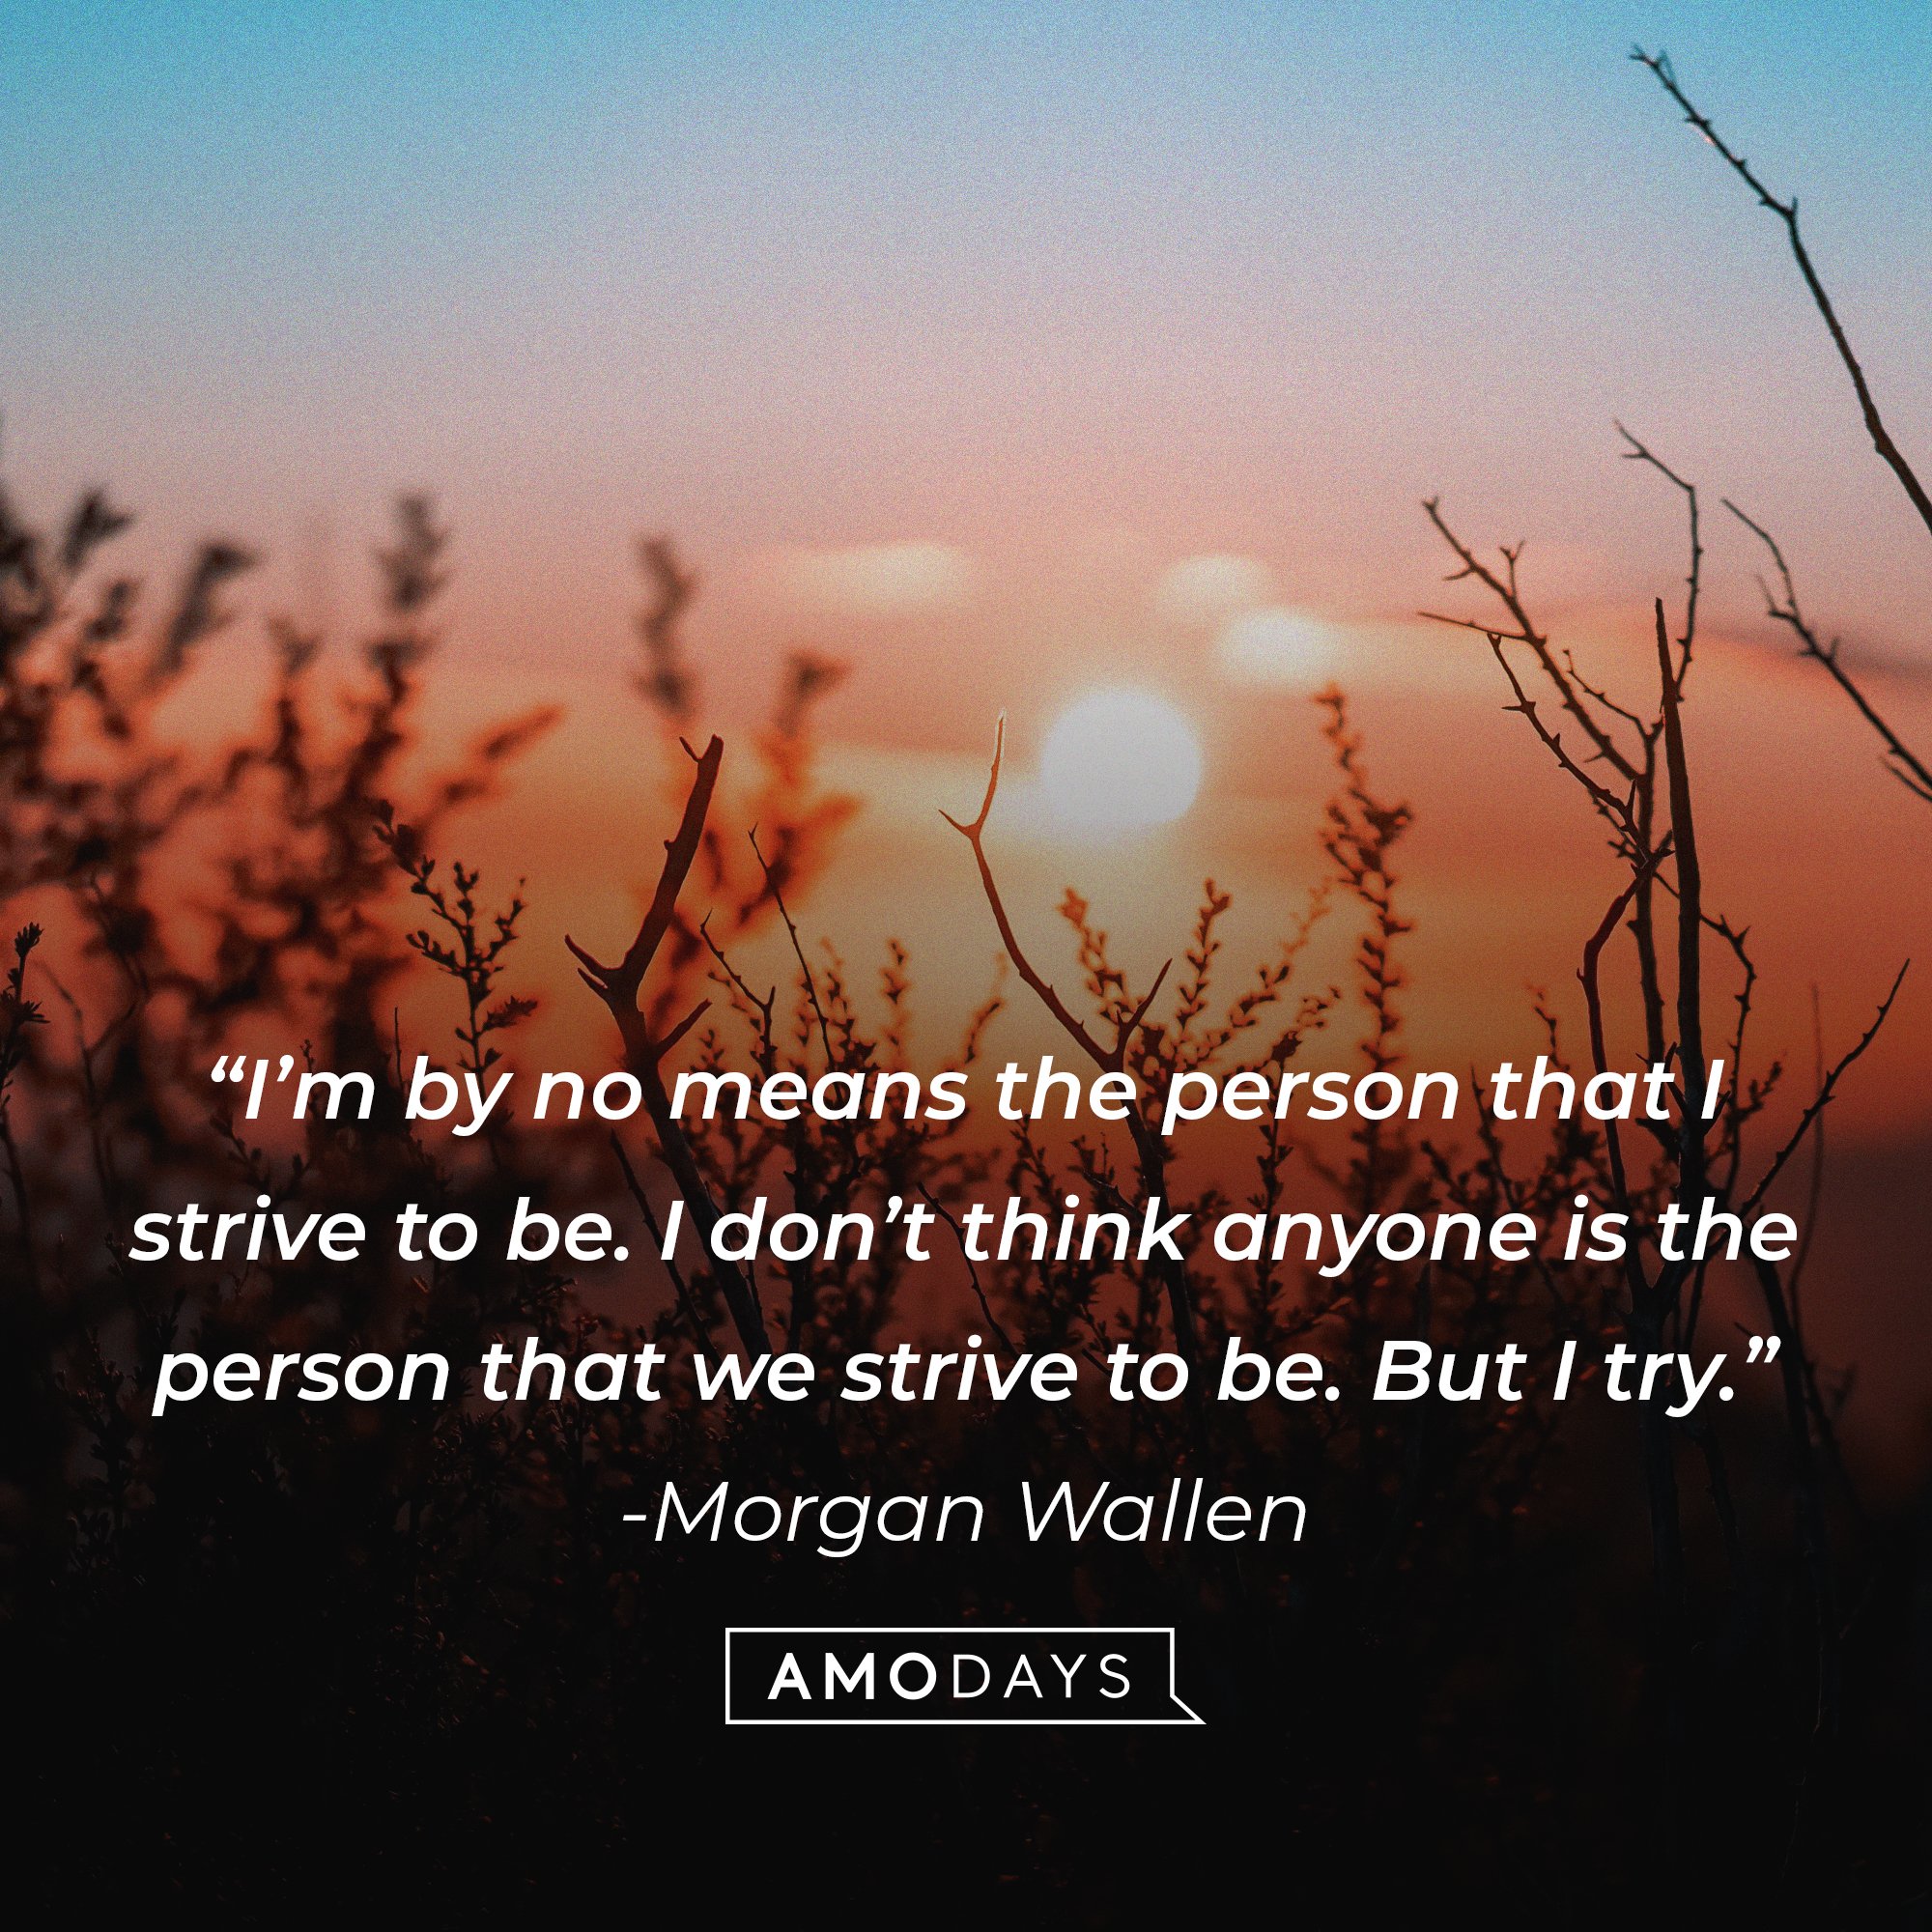  Morgan Wallen’s quote: “I’m by no means the person that I strive to be. I don’t think anyone is the person that we strive to be. But I try.” | Image: AmoDays